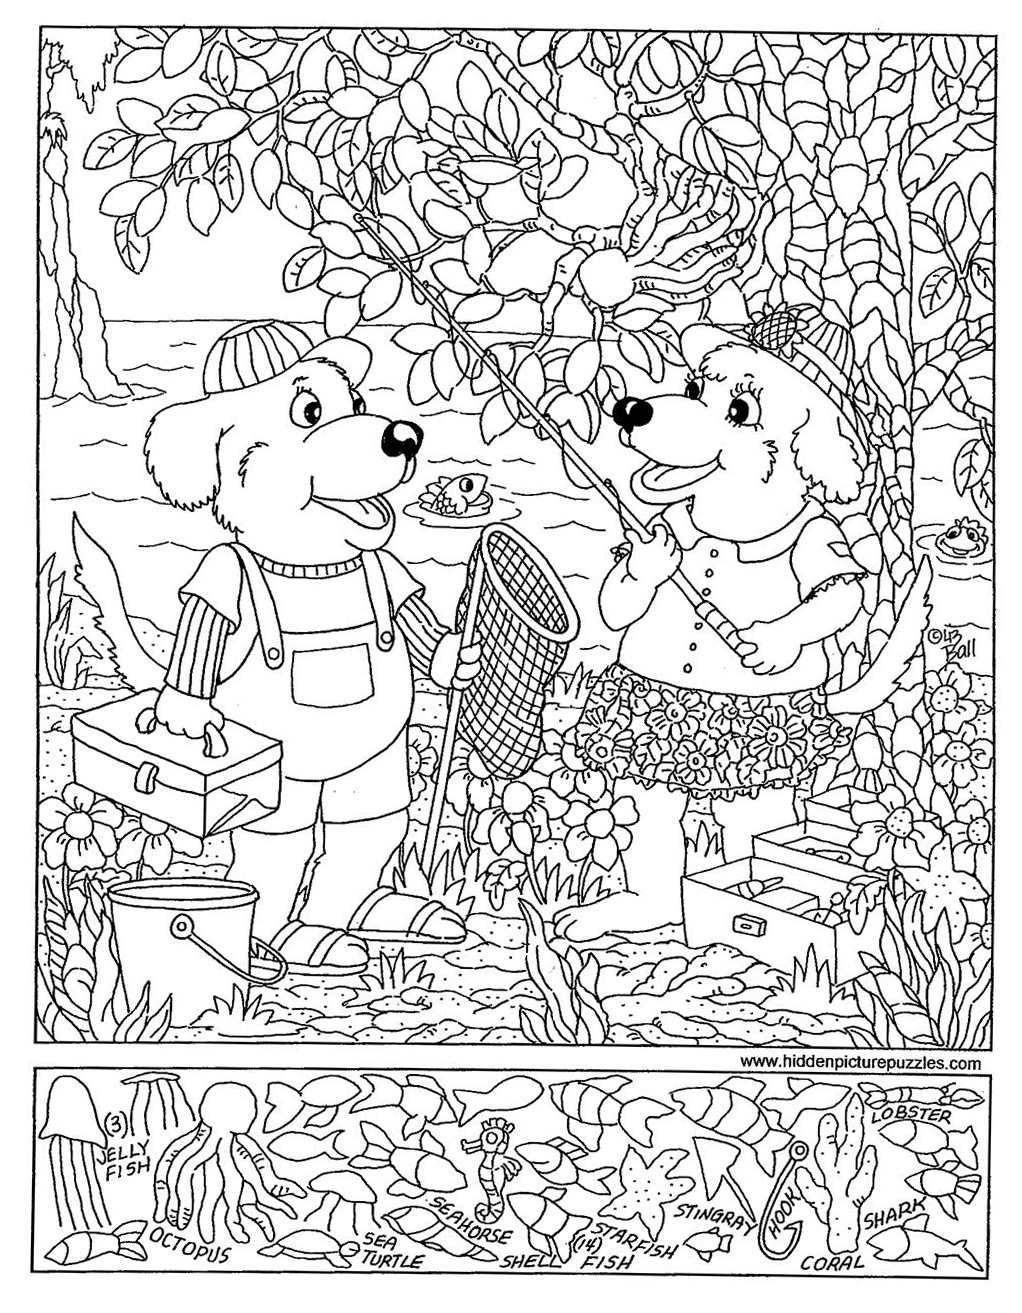 object search coloring pages and find objects - photo #26